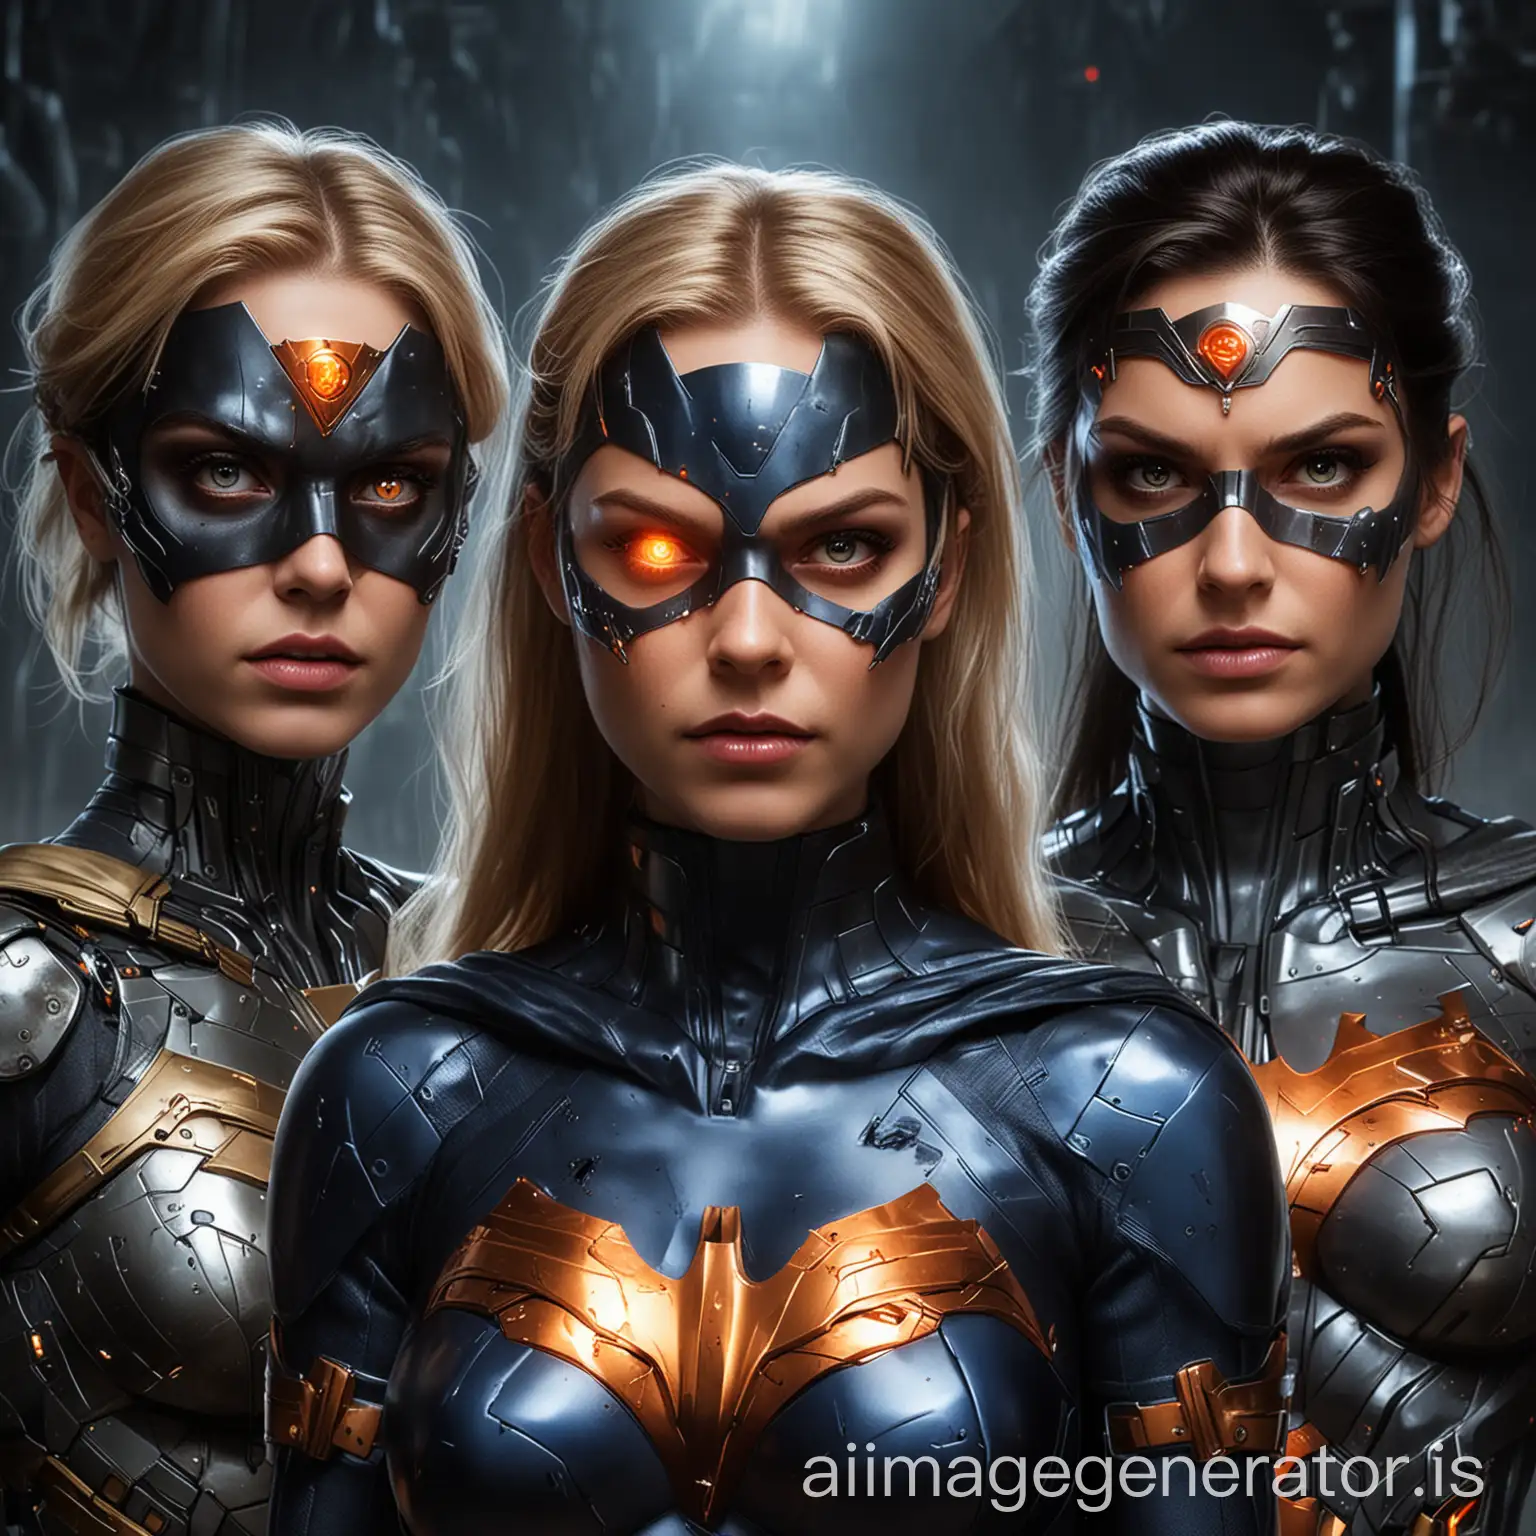 An evil machine infects three female superheroes (batgirl, supergirl and Wonder Woman), taking over their bodies and minds and turning them into evil cyborgs. mind control. cyborg. trance. eye patch. borg.  cybernetic augmentations all over their faces and bodies. glowing orange eyes